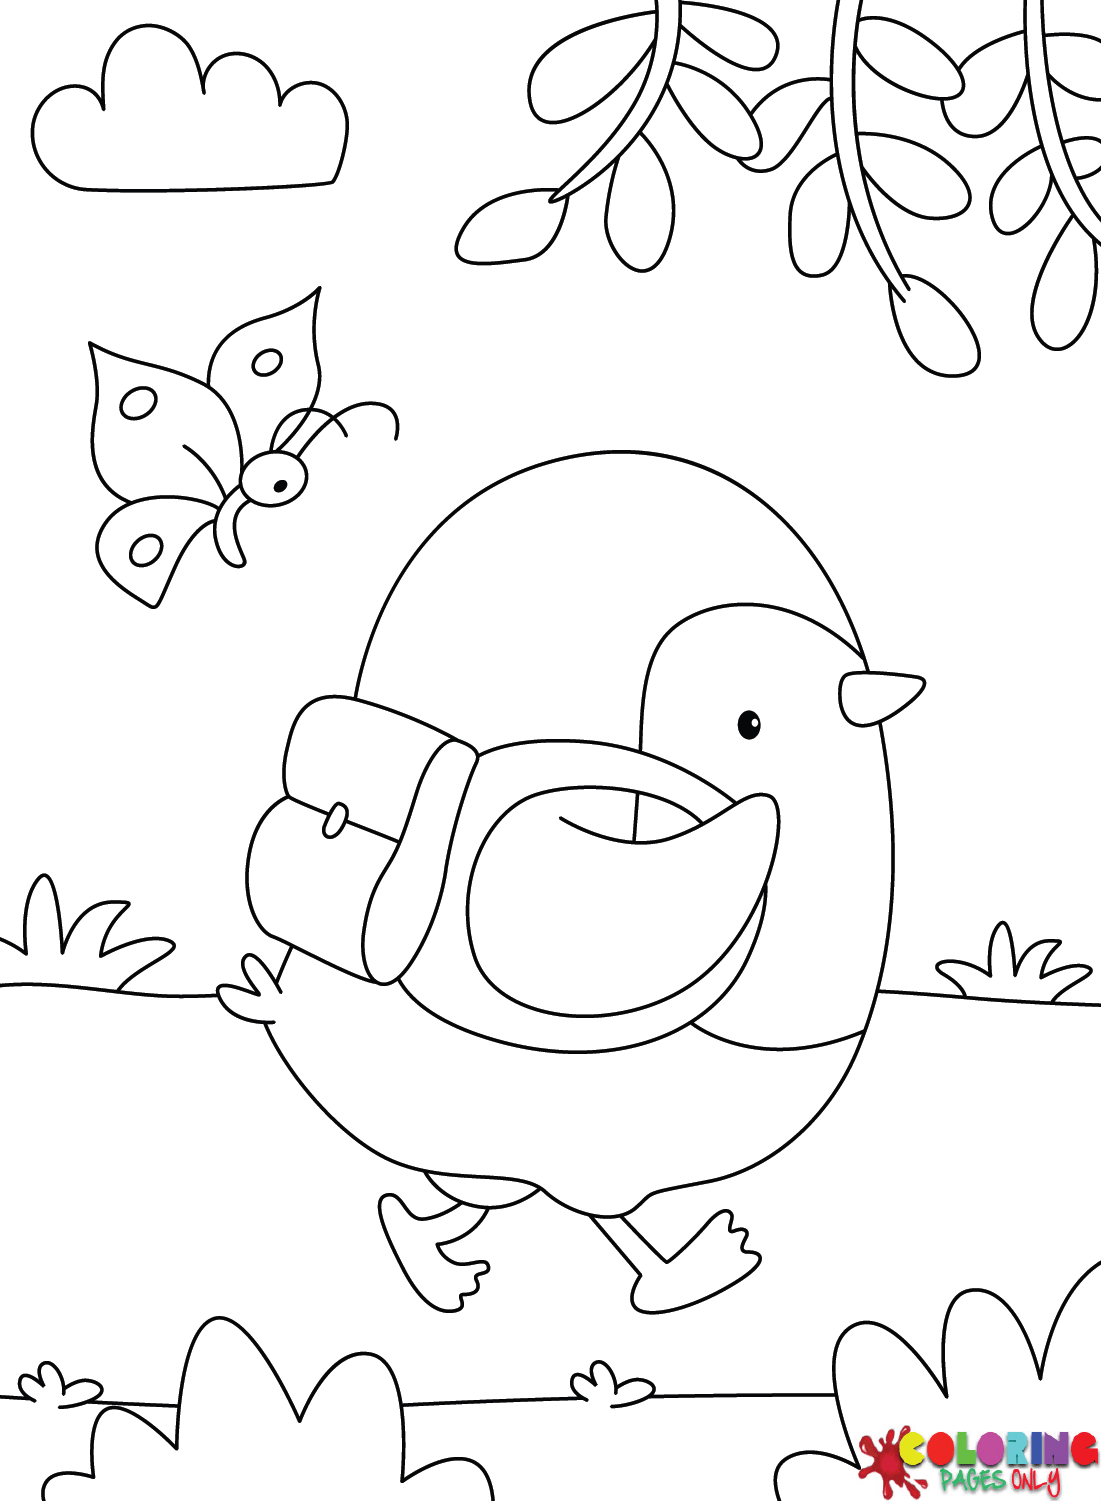 Penguin Kawaii Coloring Pages